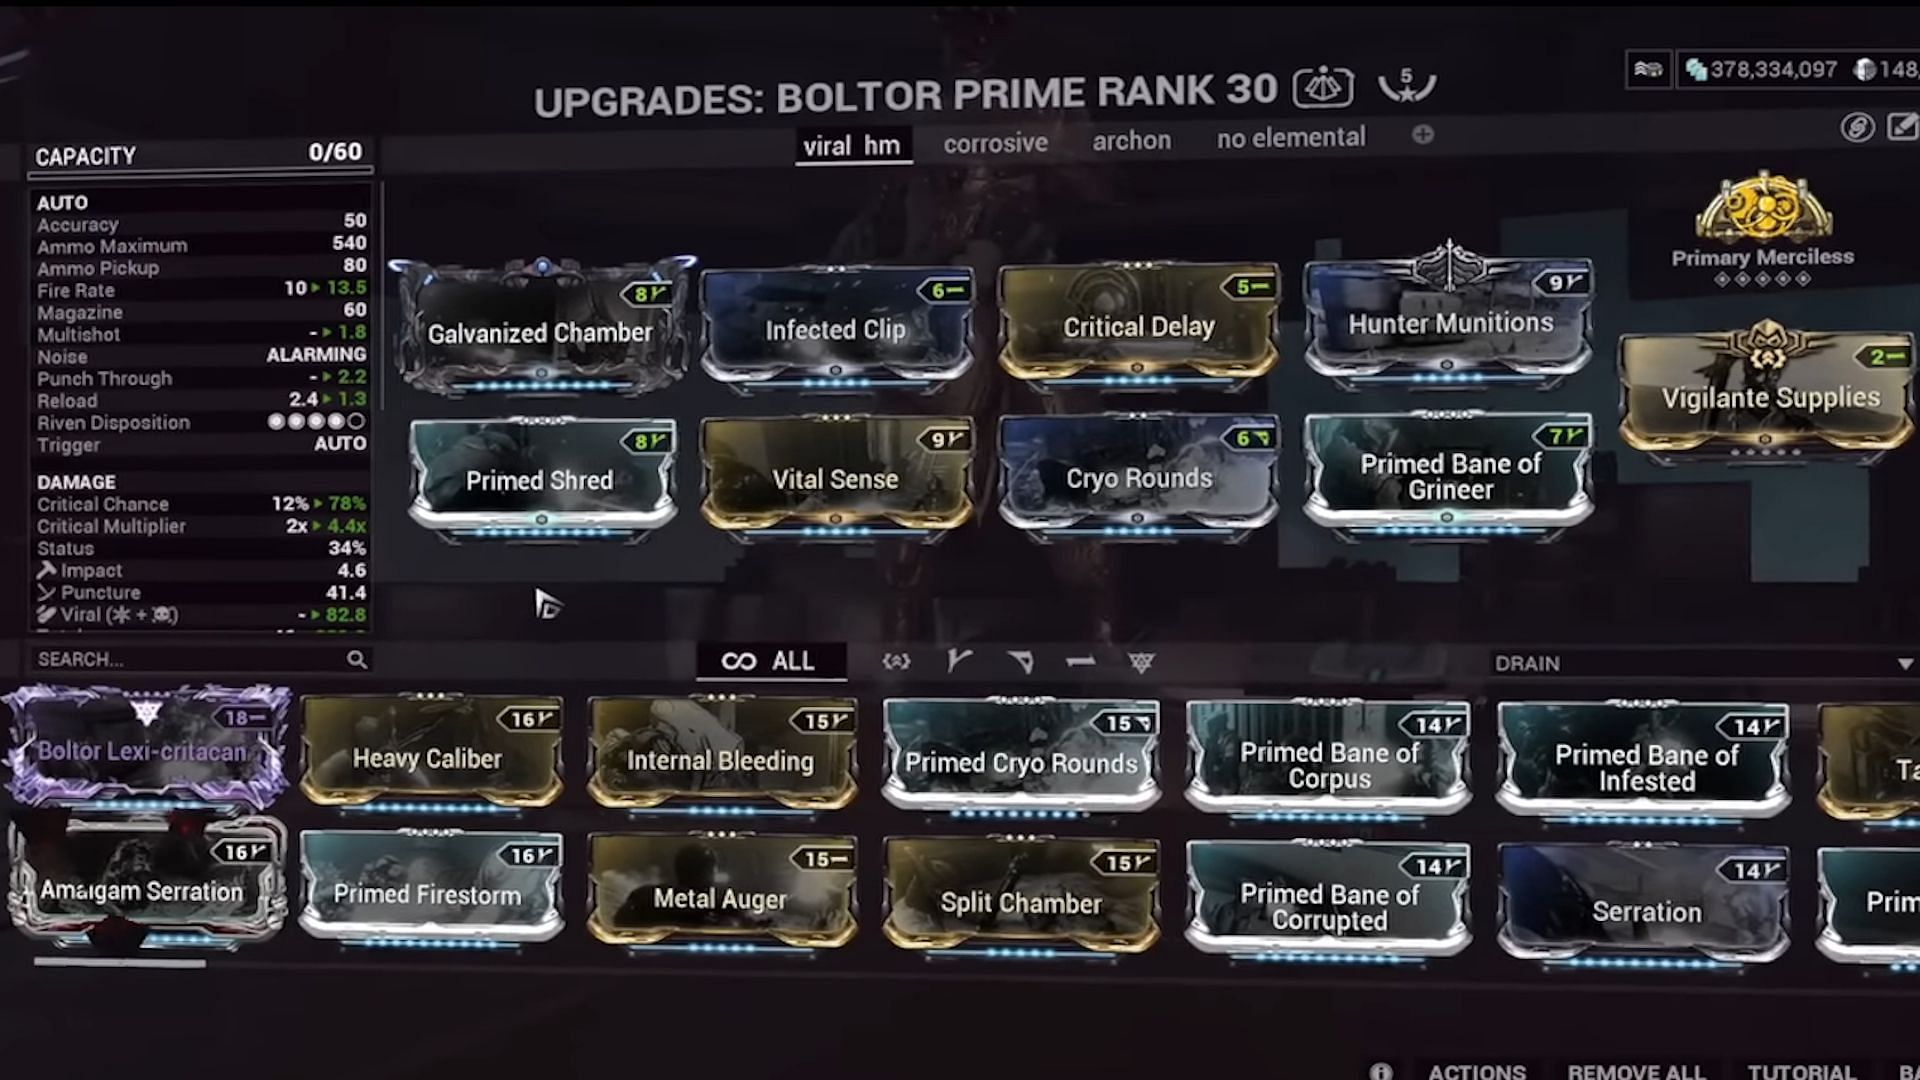 Incarnon Boltor build based on Hunter Munitions for endgame content in Warframe (image via Digital Extremes)